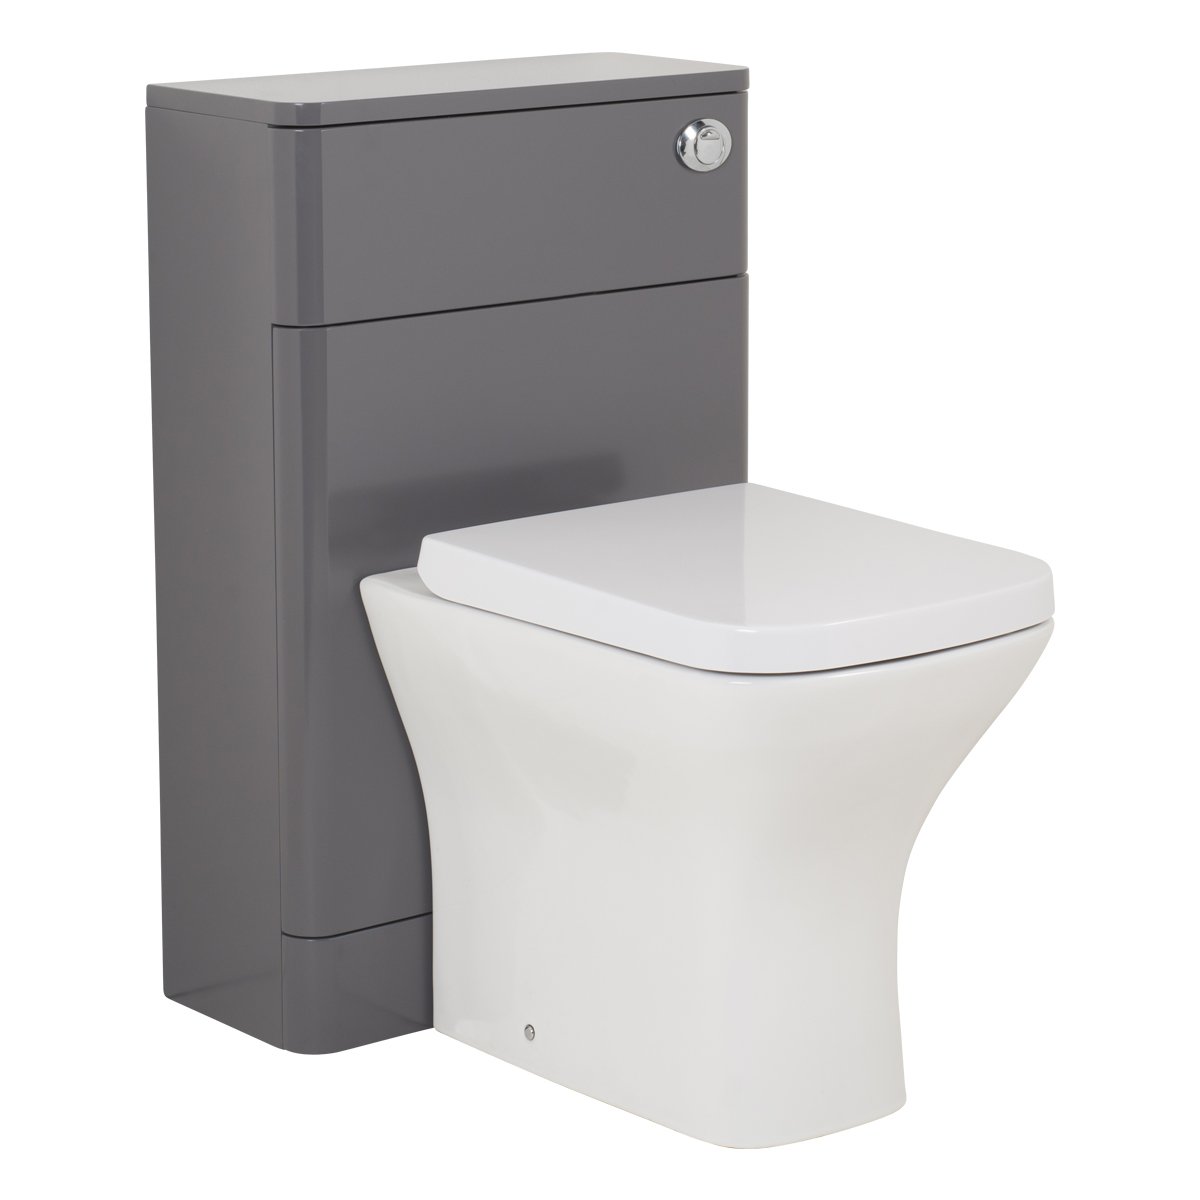 Designer Bathroom Gloss Grey Back to Wall Unit with Toilet WC Concealed Cistern 5055653275904 eBay